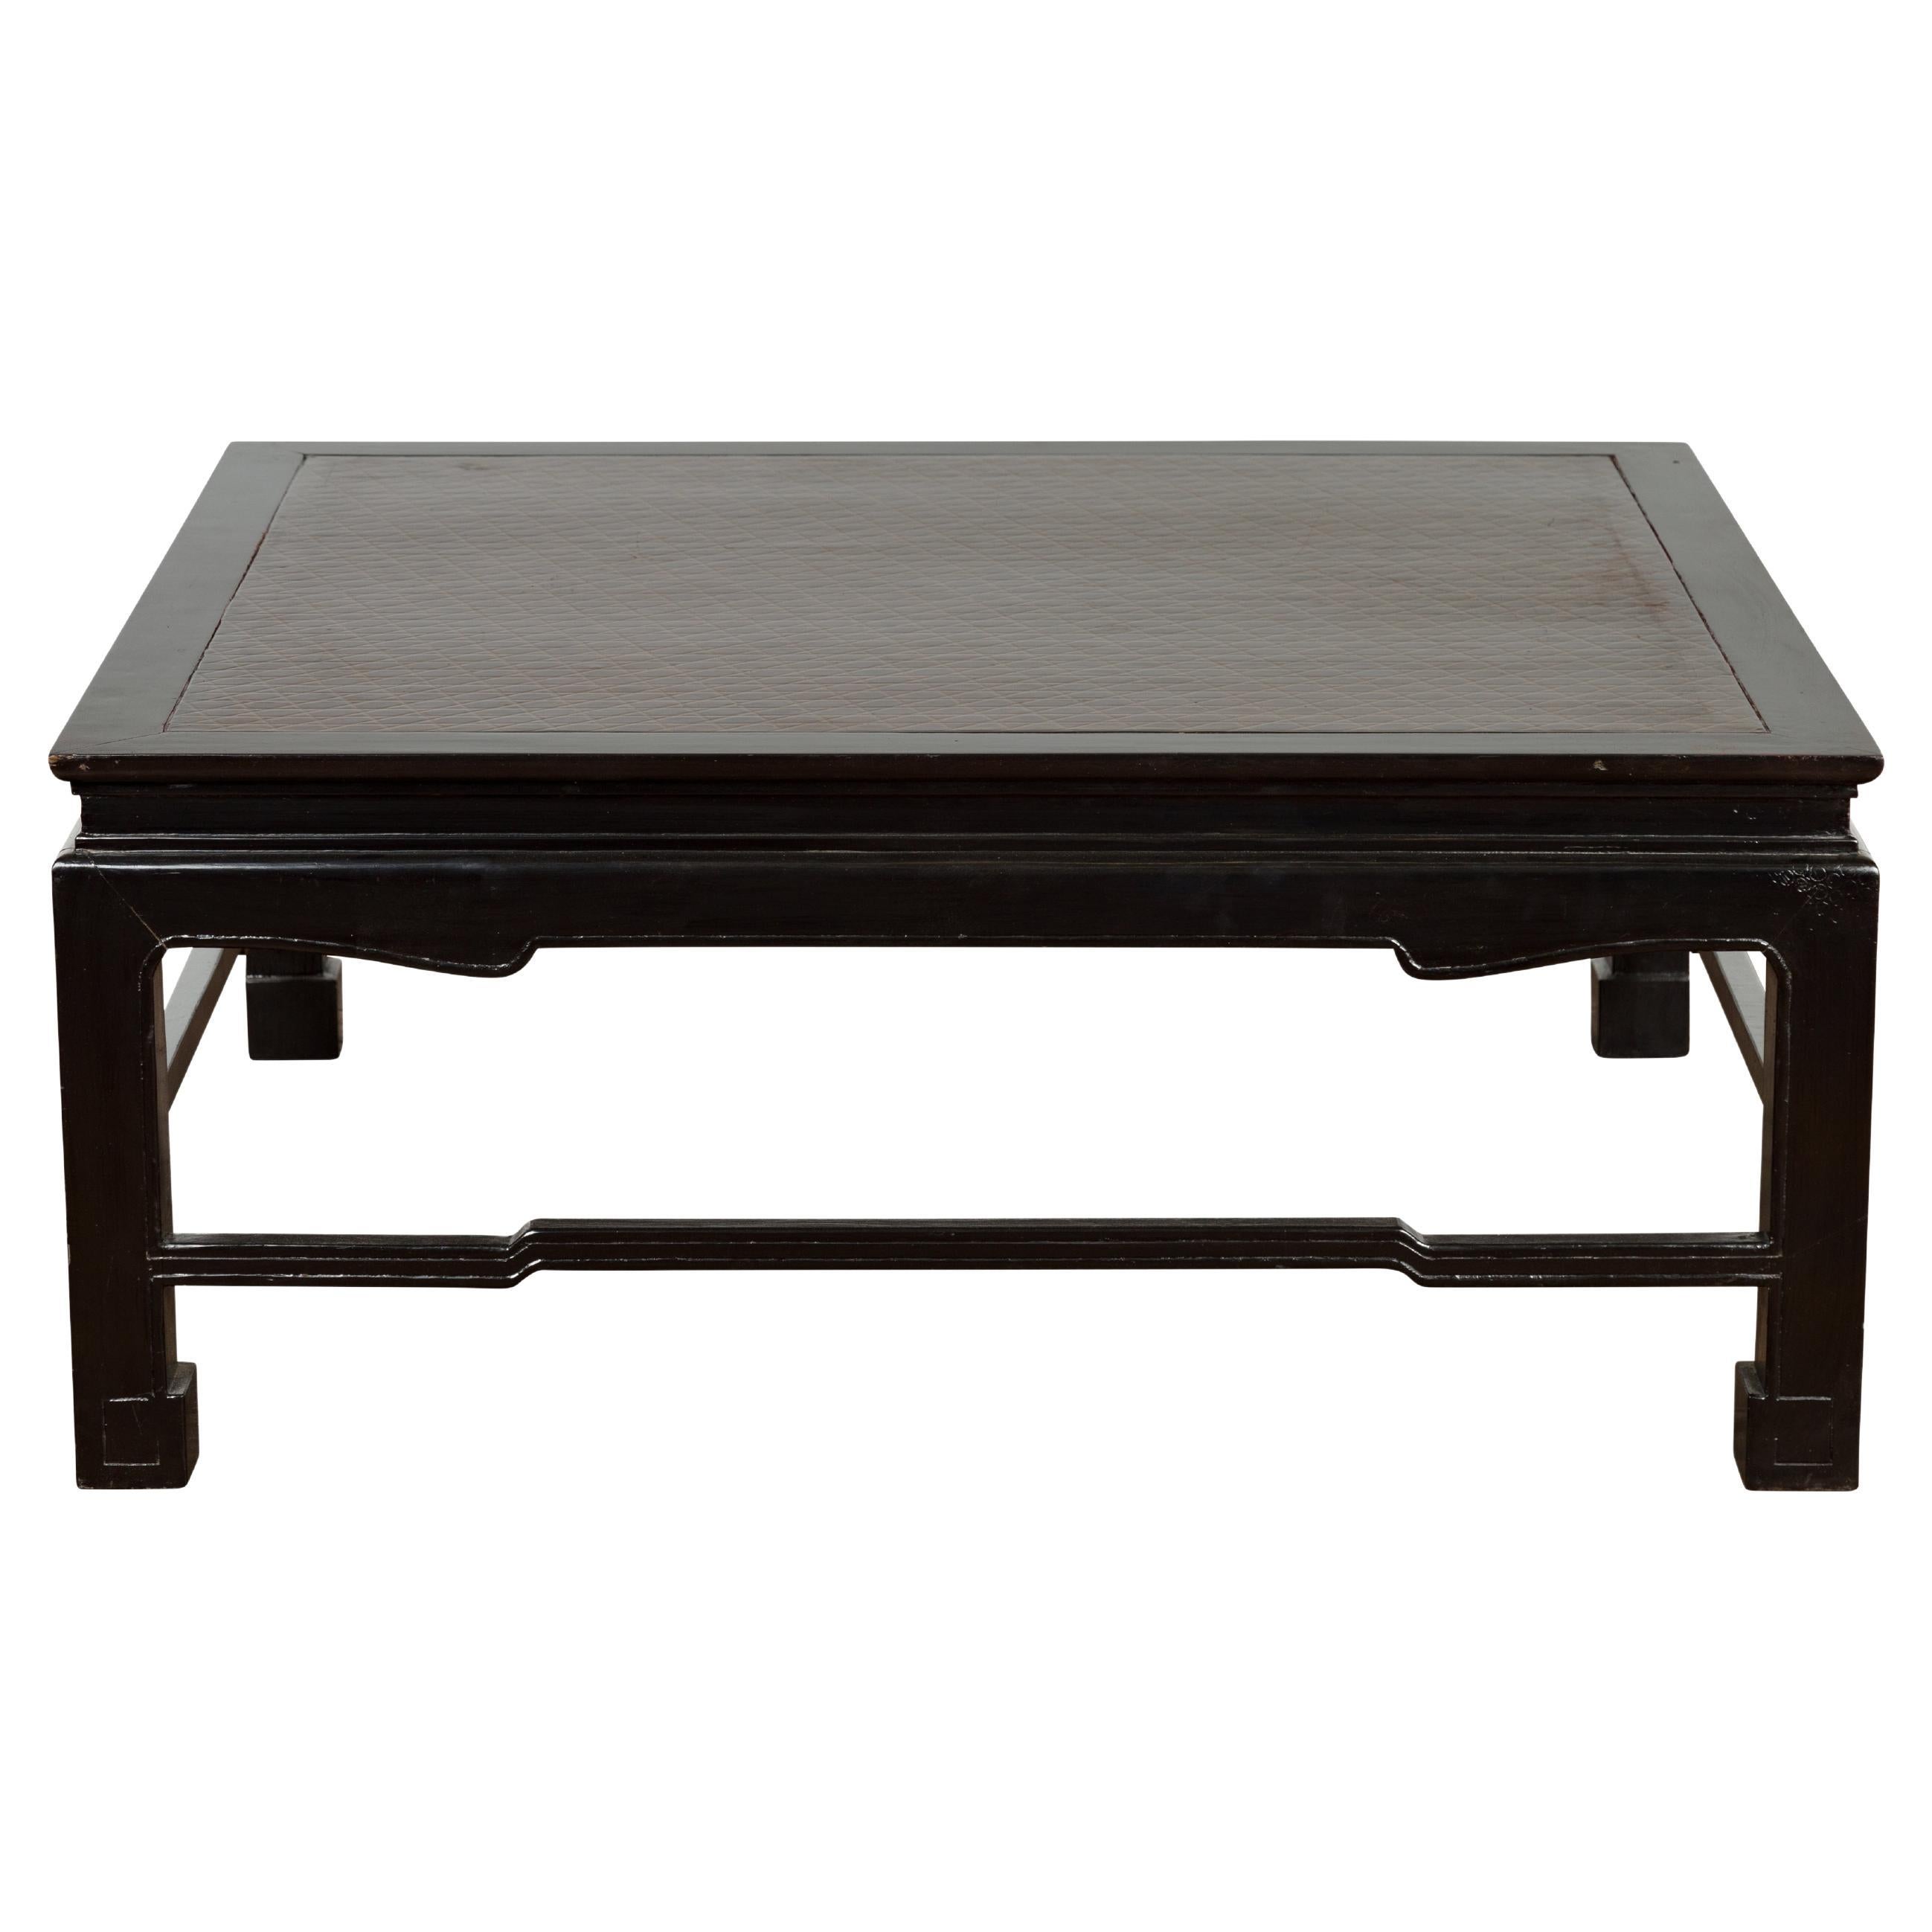 Negora Lacquered Square Vintage Coffee Table